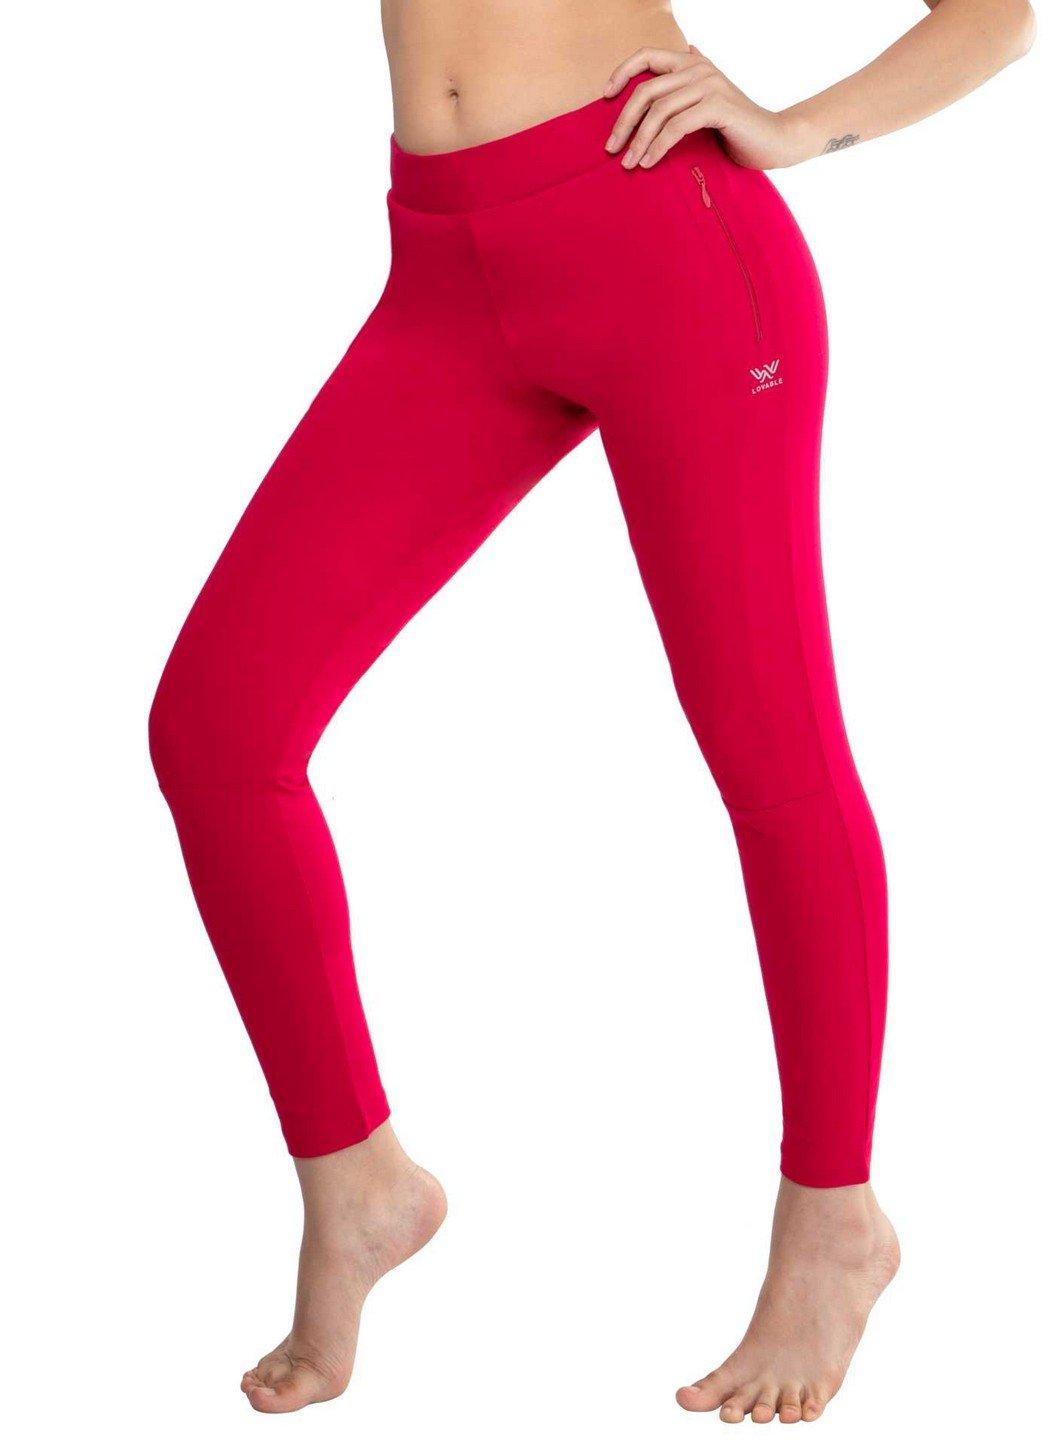 Cotton Pink Gym Wear Tights Yoga Pants With Pockets - Stilento